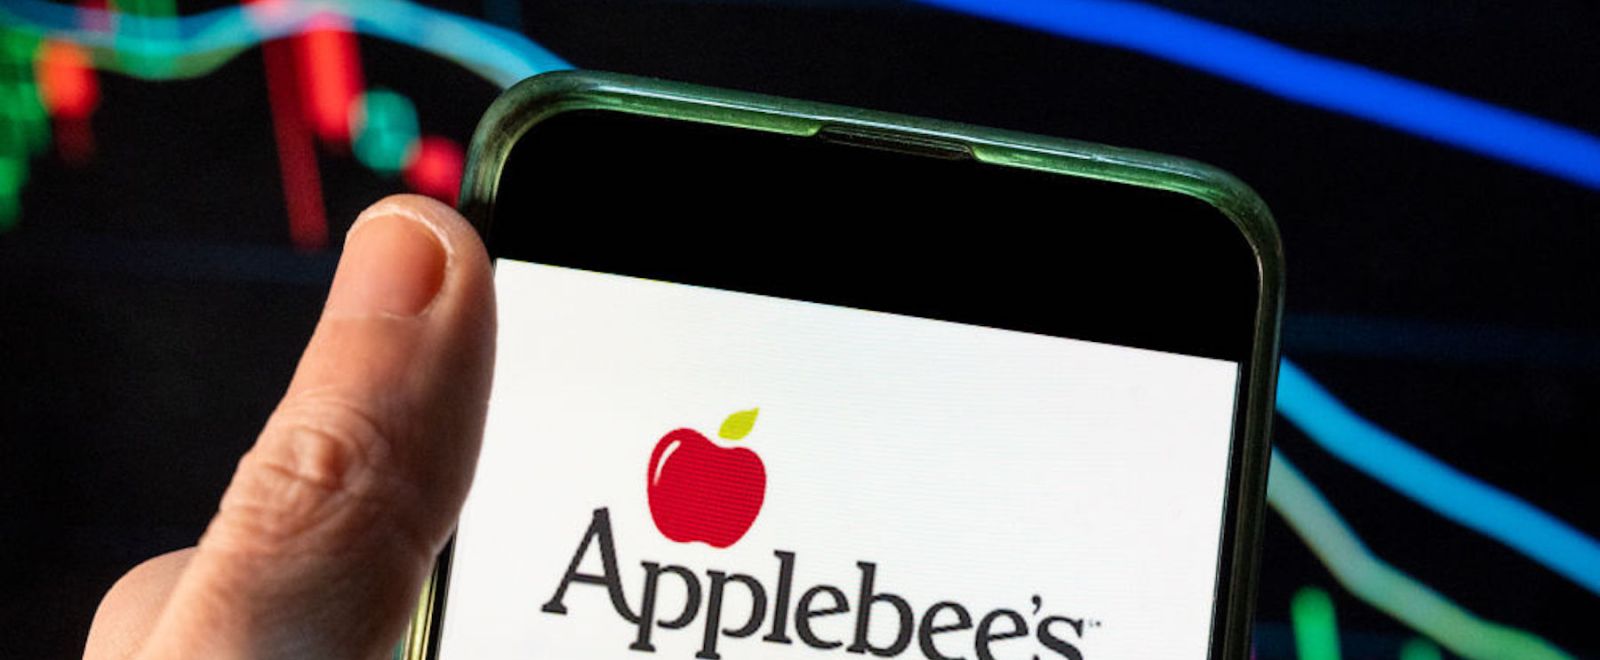 A person uses the Applebee's app on their phone